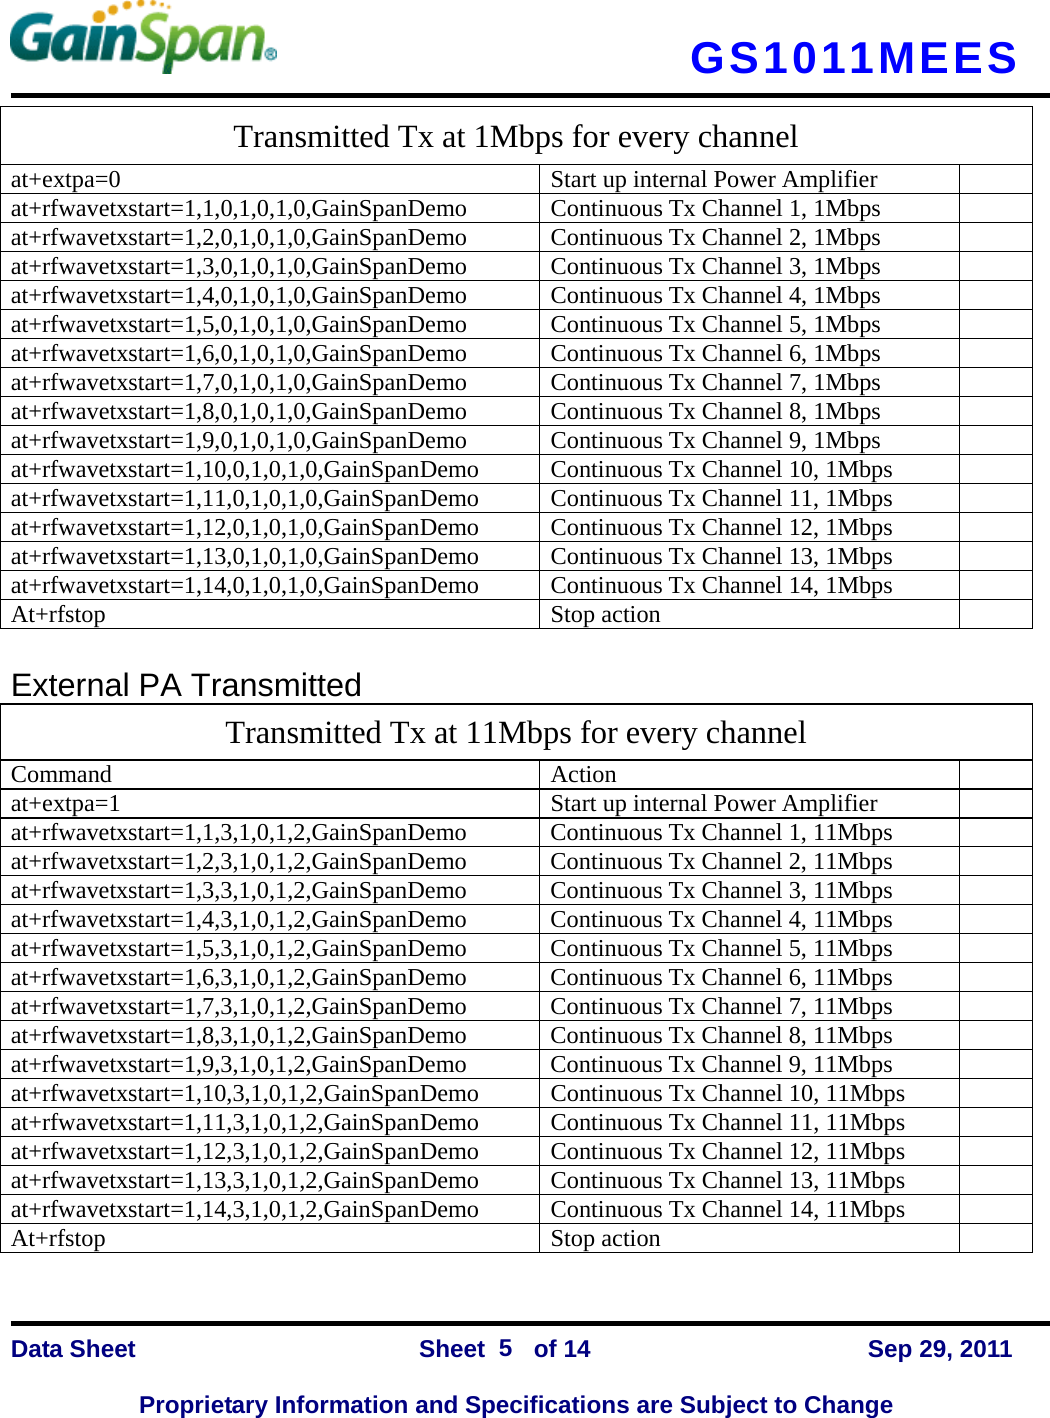   GS1011MEES    Data Sheet                Sheet    of 14      Sep 29, 2011  Proprietary Information and Specifications are Subject to Change 5 Transmitted Tx at 1Mbps for every channel at+extpa=0  Start up internal Power Amplifier   at+rfwavetxstart=1,1,0,1,0,1,0,GainSpanDemo  Continuous Tx Channel 1, 1Mbps   at+rfwavetxstart=1,2,0,1,0,1,0,GainSpanDemo  Continuous Tx Channel 2, 1Mbps   at+rfwavetxstart=1,3,0,1,0,1,0,GainSpanDemo  Continuous Tx Channel 3, 1Mbps   at+rfwavetxstart=1,4,0,1,0,1,0,GainSpanDemo  Continuous Tx Channel 4, 1Mbps   at+rfwavetxstart=1,5,0,1,0,1,0,GainSpanDemo  Continuous Tx Channel 5, 1Mbps   at+rfwavetxstart=1,6,0,1,0,1,0,GainSpanDemo  Continuous Tx Channel 6, 1Mbps   at+rfwavetxstart=1,7,0,1,0,1,0,GainSpanDemo  Continuous Tx Channel 7, 1Mbps   at+rfwavetxstart=1,8,0,1,0,1,0,GainSpanDemo  Continuous Tx Channel 8, 1Mbps   at+rfwavetxstart=1,9,0,1,0,1,0,GainSpanDemo  Continuous Tx Channel 9, 1Mbps   at+rfwavetxstart=1,10,0,1,0,1,0,GainSpanDemo  Continuous Tx Channel 10, 1Mbps   at+rfwavetxstart=1,11,0,1,0,1,0,GainSpanDemo  Continuous Tx Channel 11, 1Mbps   at+rfwavetxstart=1,12,0,1,0,1,0,GainSpanDemo  Continuous Tx Channel 12, 1Mbps   at+rfwavetxstart=1,13,0,1,0,1,0,GainSpanDemo  Continuous Tx Channel 13, 1Mbps   at+rfwavetxstart=1,14,0,1,0,1,0,GainSpanDemo  Continuous Tx Channel 14, 1Mbps   At+rfstop Stop action   External PA Transmitted Transmitted Tx at 11Mbps for every channel Command Action  at+extpa=1  Start up internal Power Amplifier   at+rfwavetxstart=1,1,3,1,0,1,2,GainSpanDemo  Continuous Tx Channel 1, 11Mbps   at+rfwavetxstart=1,2,3,1,0,1,2,GainSpanDemo  Continuous Tx Channel 2, 11Mbps   at+rfwavetxstart=1,3,3,1,0,1,2,GainSpanDemo  Continuous Tx Channel 3, 11Mbps   at+rfwavetxstart=1,4,3,1,0,1,2,GainSpanDemo  Continuous Tx Channel 4, 11Mbps   at+rfwavetxstart=1,5,3,1,0,1,2,GainSpanDemo  Continuous Tx Channel 5, 11Mbps   at+rfwavetxstart=1,6,3,1,0,1,2,GainSpanDemo  Continuous Tx Channel 6, 11Mbps   at+rfwavetxstart=1,7,3,1,0,1,2,GainSpanDemo  Continuous Tx Channel 7, 11Mbps   at+rfwavetxstart=1,8,3,1,0,1,2,GainSpanDemo  Continuous Tx Channel 8, 11Mbps   at+rfwavetxstart=1,9,3,1,0,1,2,GainSpanDemo  Continuous Tx Channel 9, 11Mbps   at+rfwavetxstart=1,10,3,1,0,1,2,GainSpanDemo  Continuous Tx Channel 10, 11Mbps   at+rfwavetxstart=1,11,3,1,0,1,2,GainSpanDemo  Continuous Tx Channel 11, 11Mbps   at+rfwavetxstart=1,12,3,1,0,1,2,GainSpanDemo  Continuous Tx Channel 12, 11Mbps   at+rfwavetxstart=1,13,3,1,0,1,2,GainSpanDemo  Continuous Tx Channel 13, 11Mbps   at+rfwavetxstart=1,14,3,1,0,1,2,GainSpanDemo  Continuous Tx Channel 14, 11Mbps   At+rfstop Stop action  